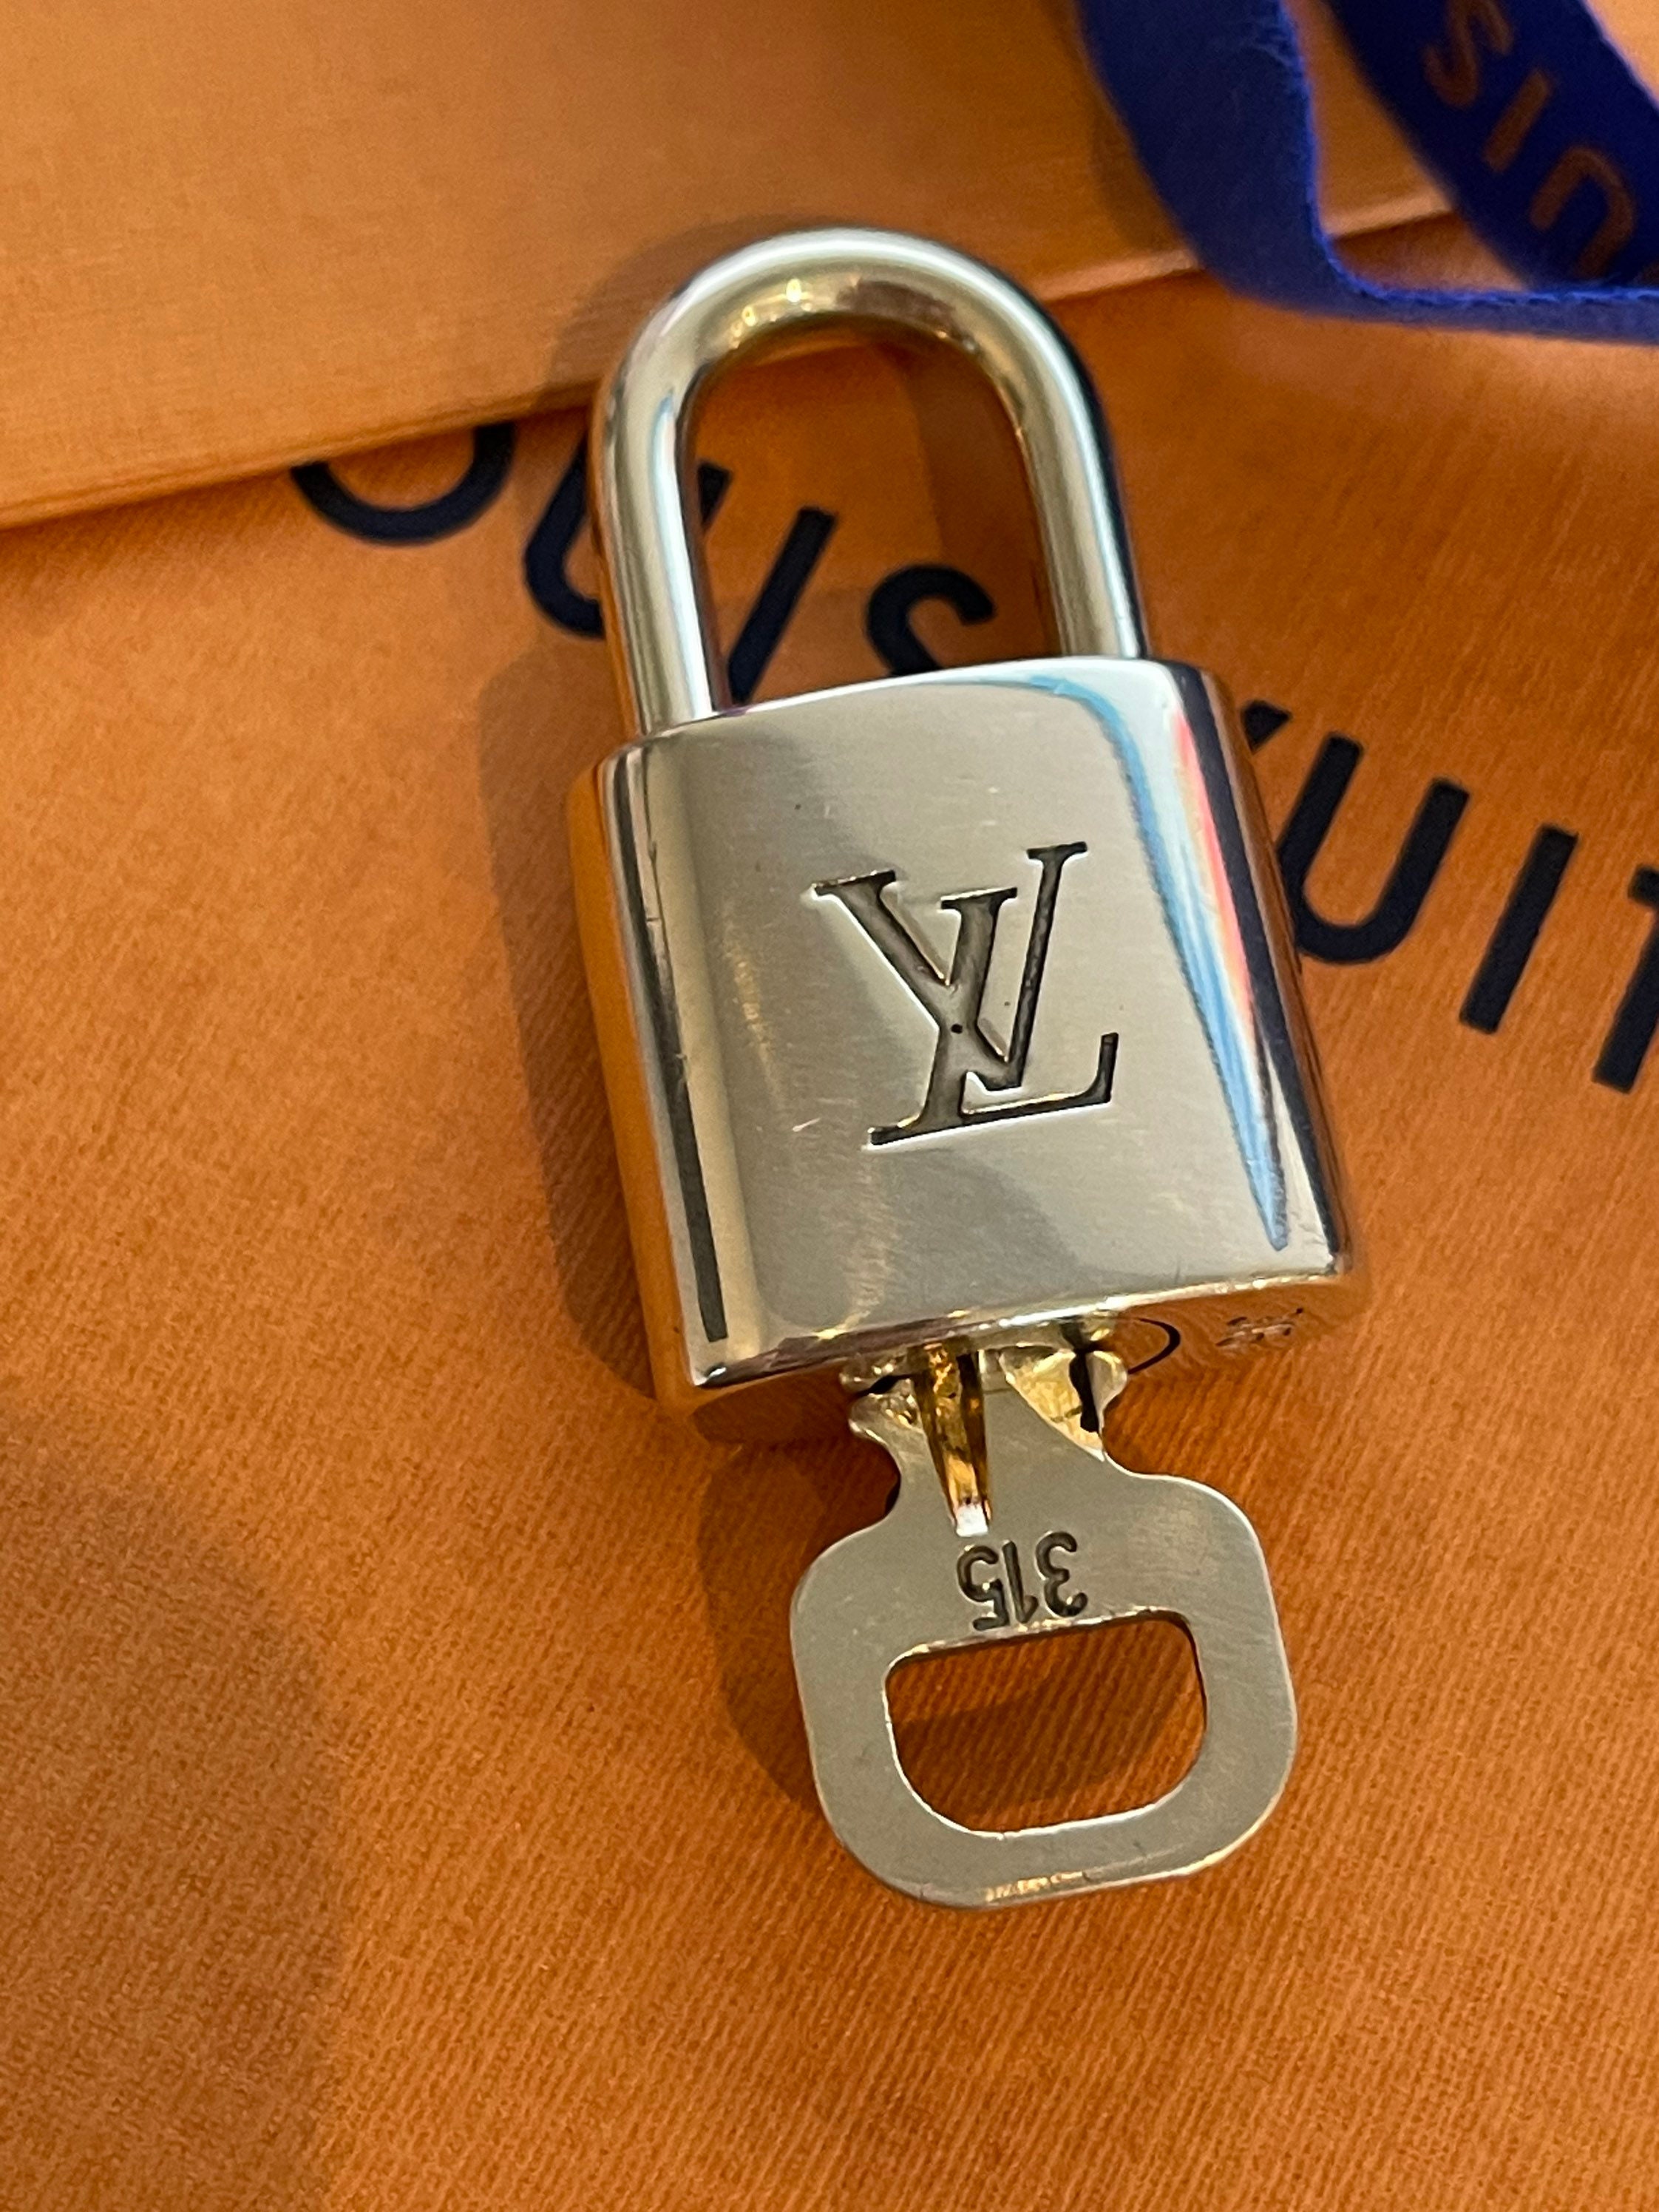 Pinkerly Special Louis Vuitton Padlock and One Key 305 Lock 